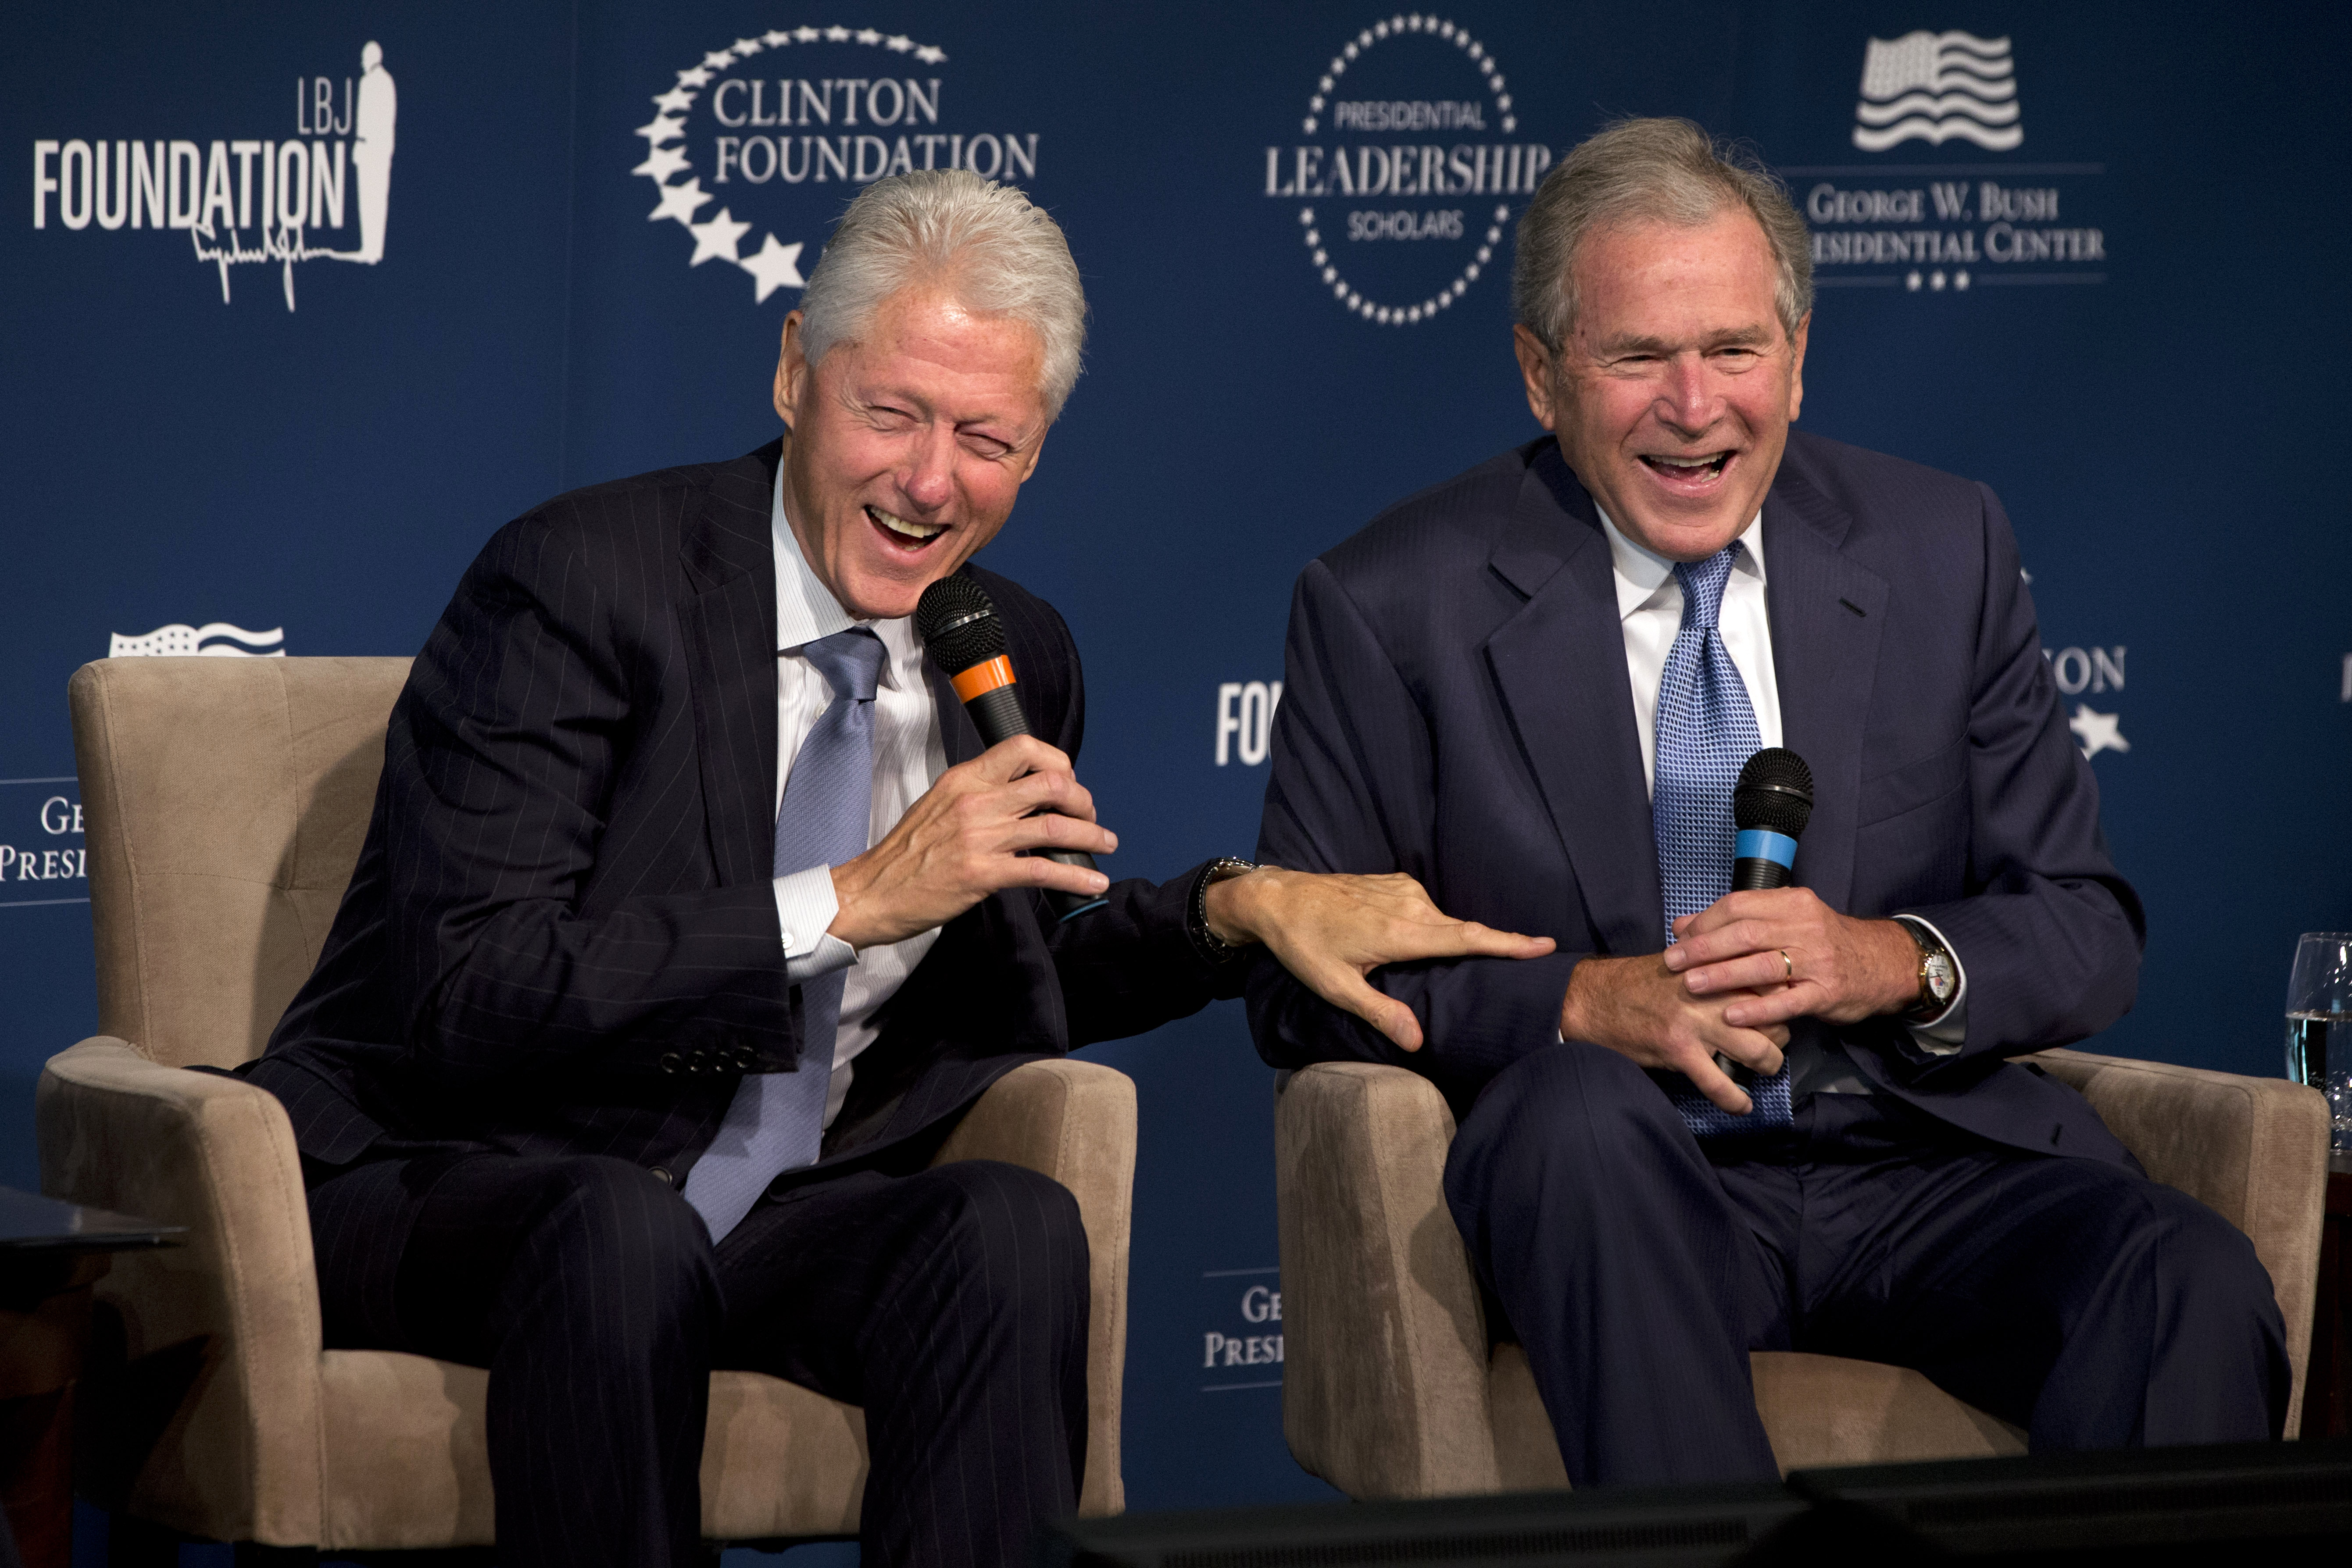 Former Presidents Bill Clinton, left, and George W. Bush, laugh while participating in the Presidential Leadership Scholars Program Launch, Monday, Sept. 8, 2014, at The Newseum in Washington. The two are launching a new scholars program at four presidential libraries, aiming to help academics and business leaders learn more about presidential leadership.  (AP Photo/Jacquelyn Martin)